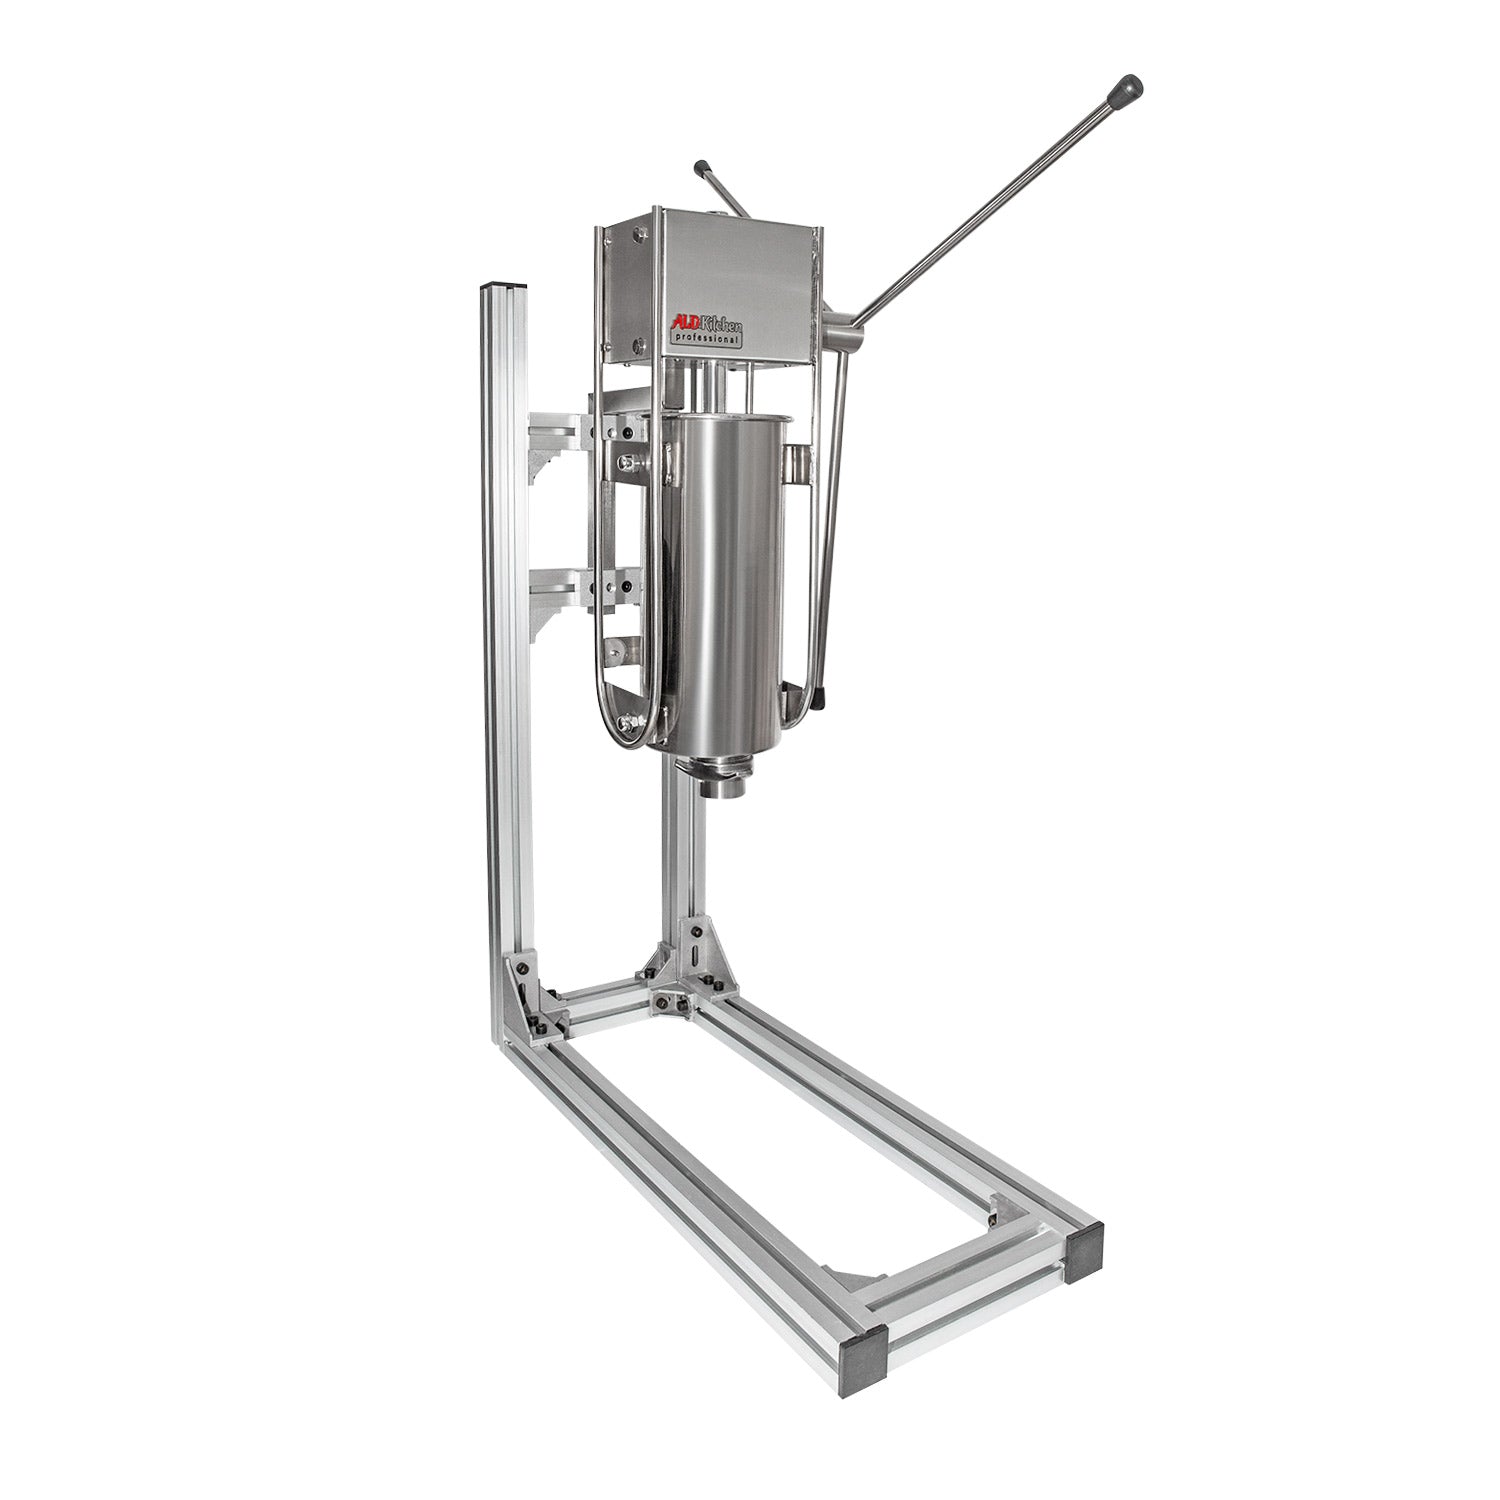 Churros Filling Machine - 5L - Stainless Steel - Manual Operation